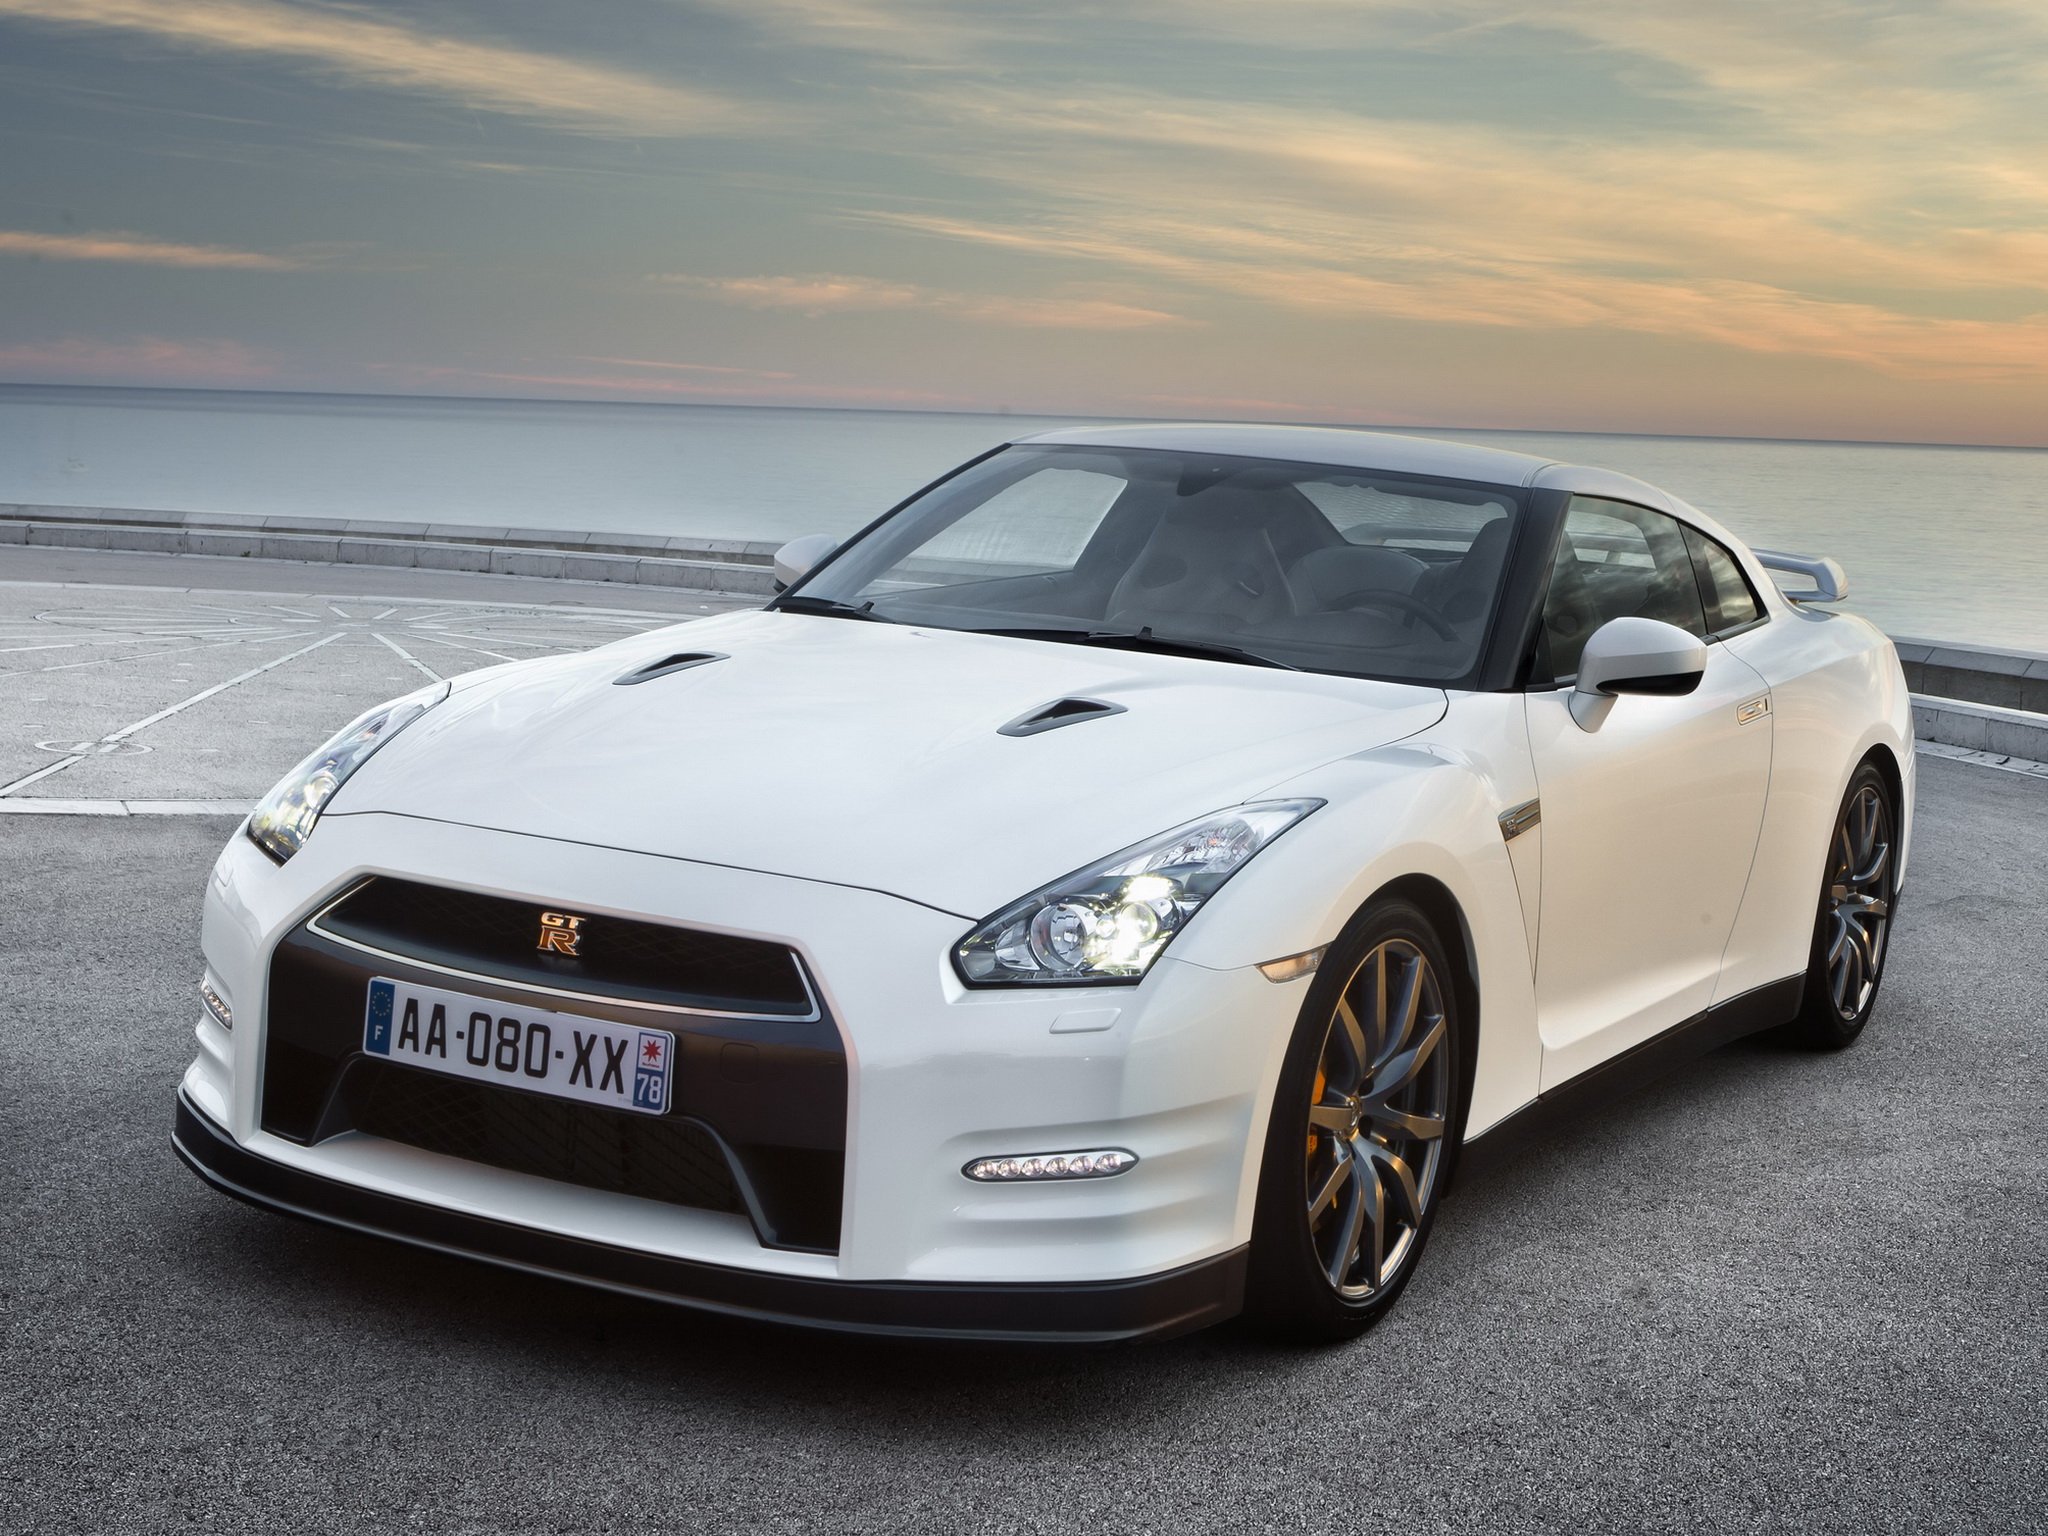 nissan, Gt r, Black, Edition, R35, Cars, Coupe, 2010 Wallpaper